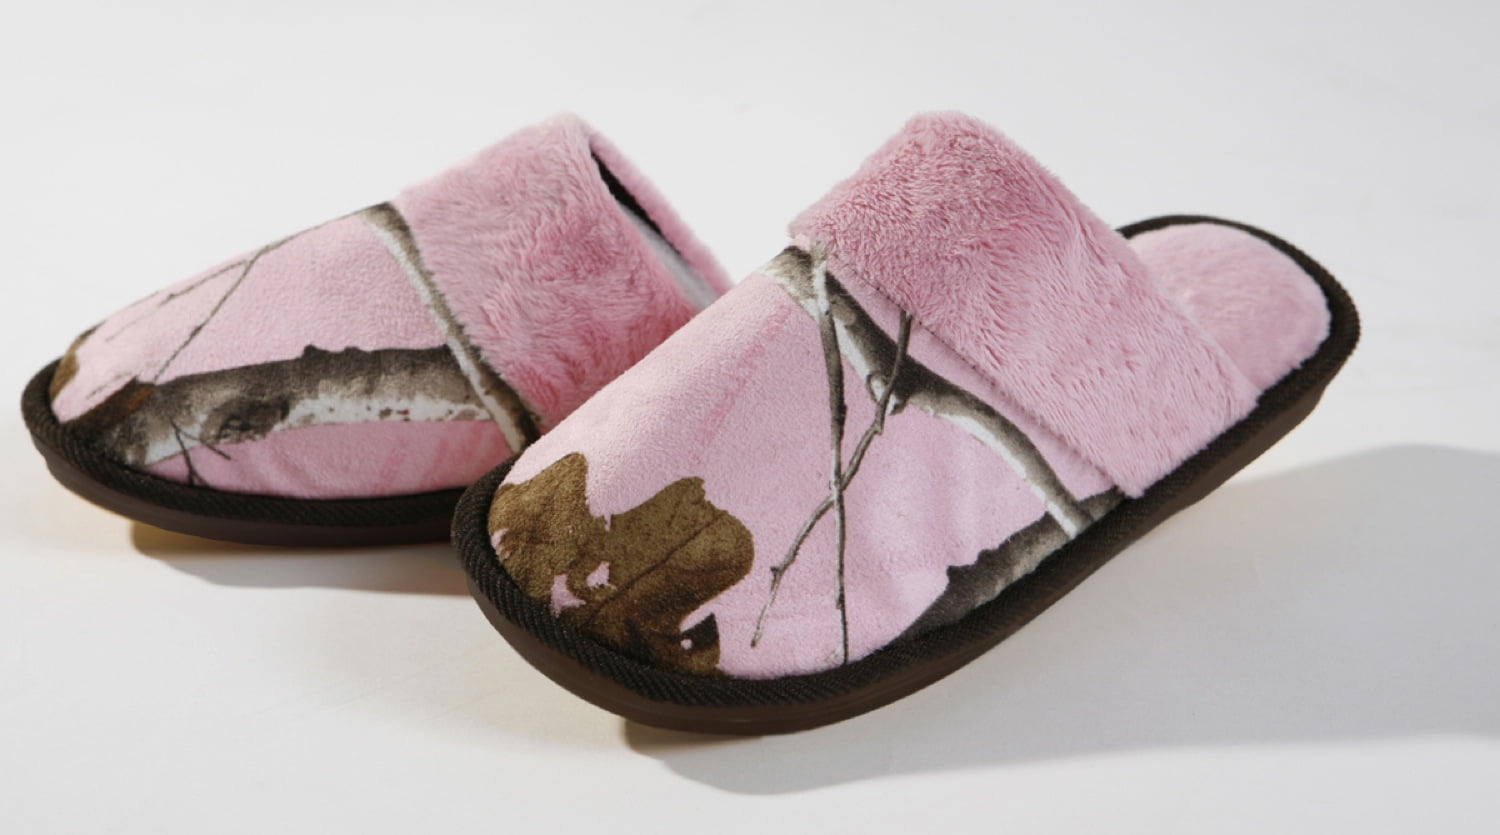 large womens slippers